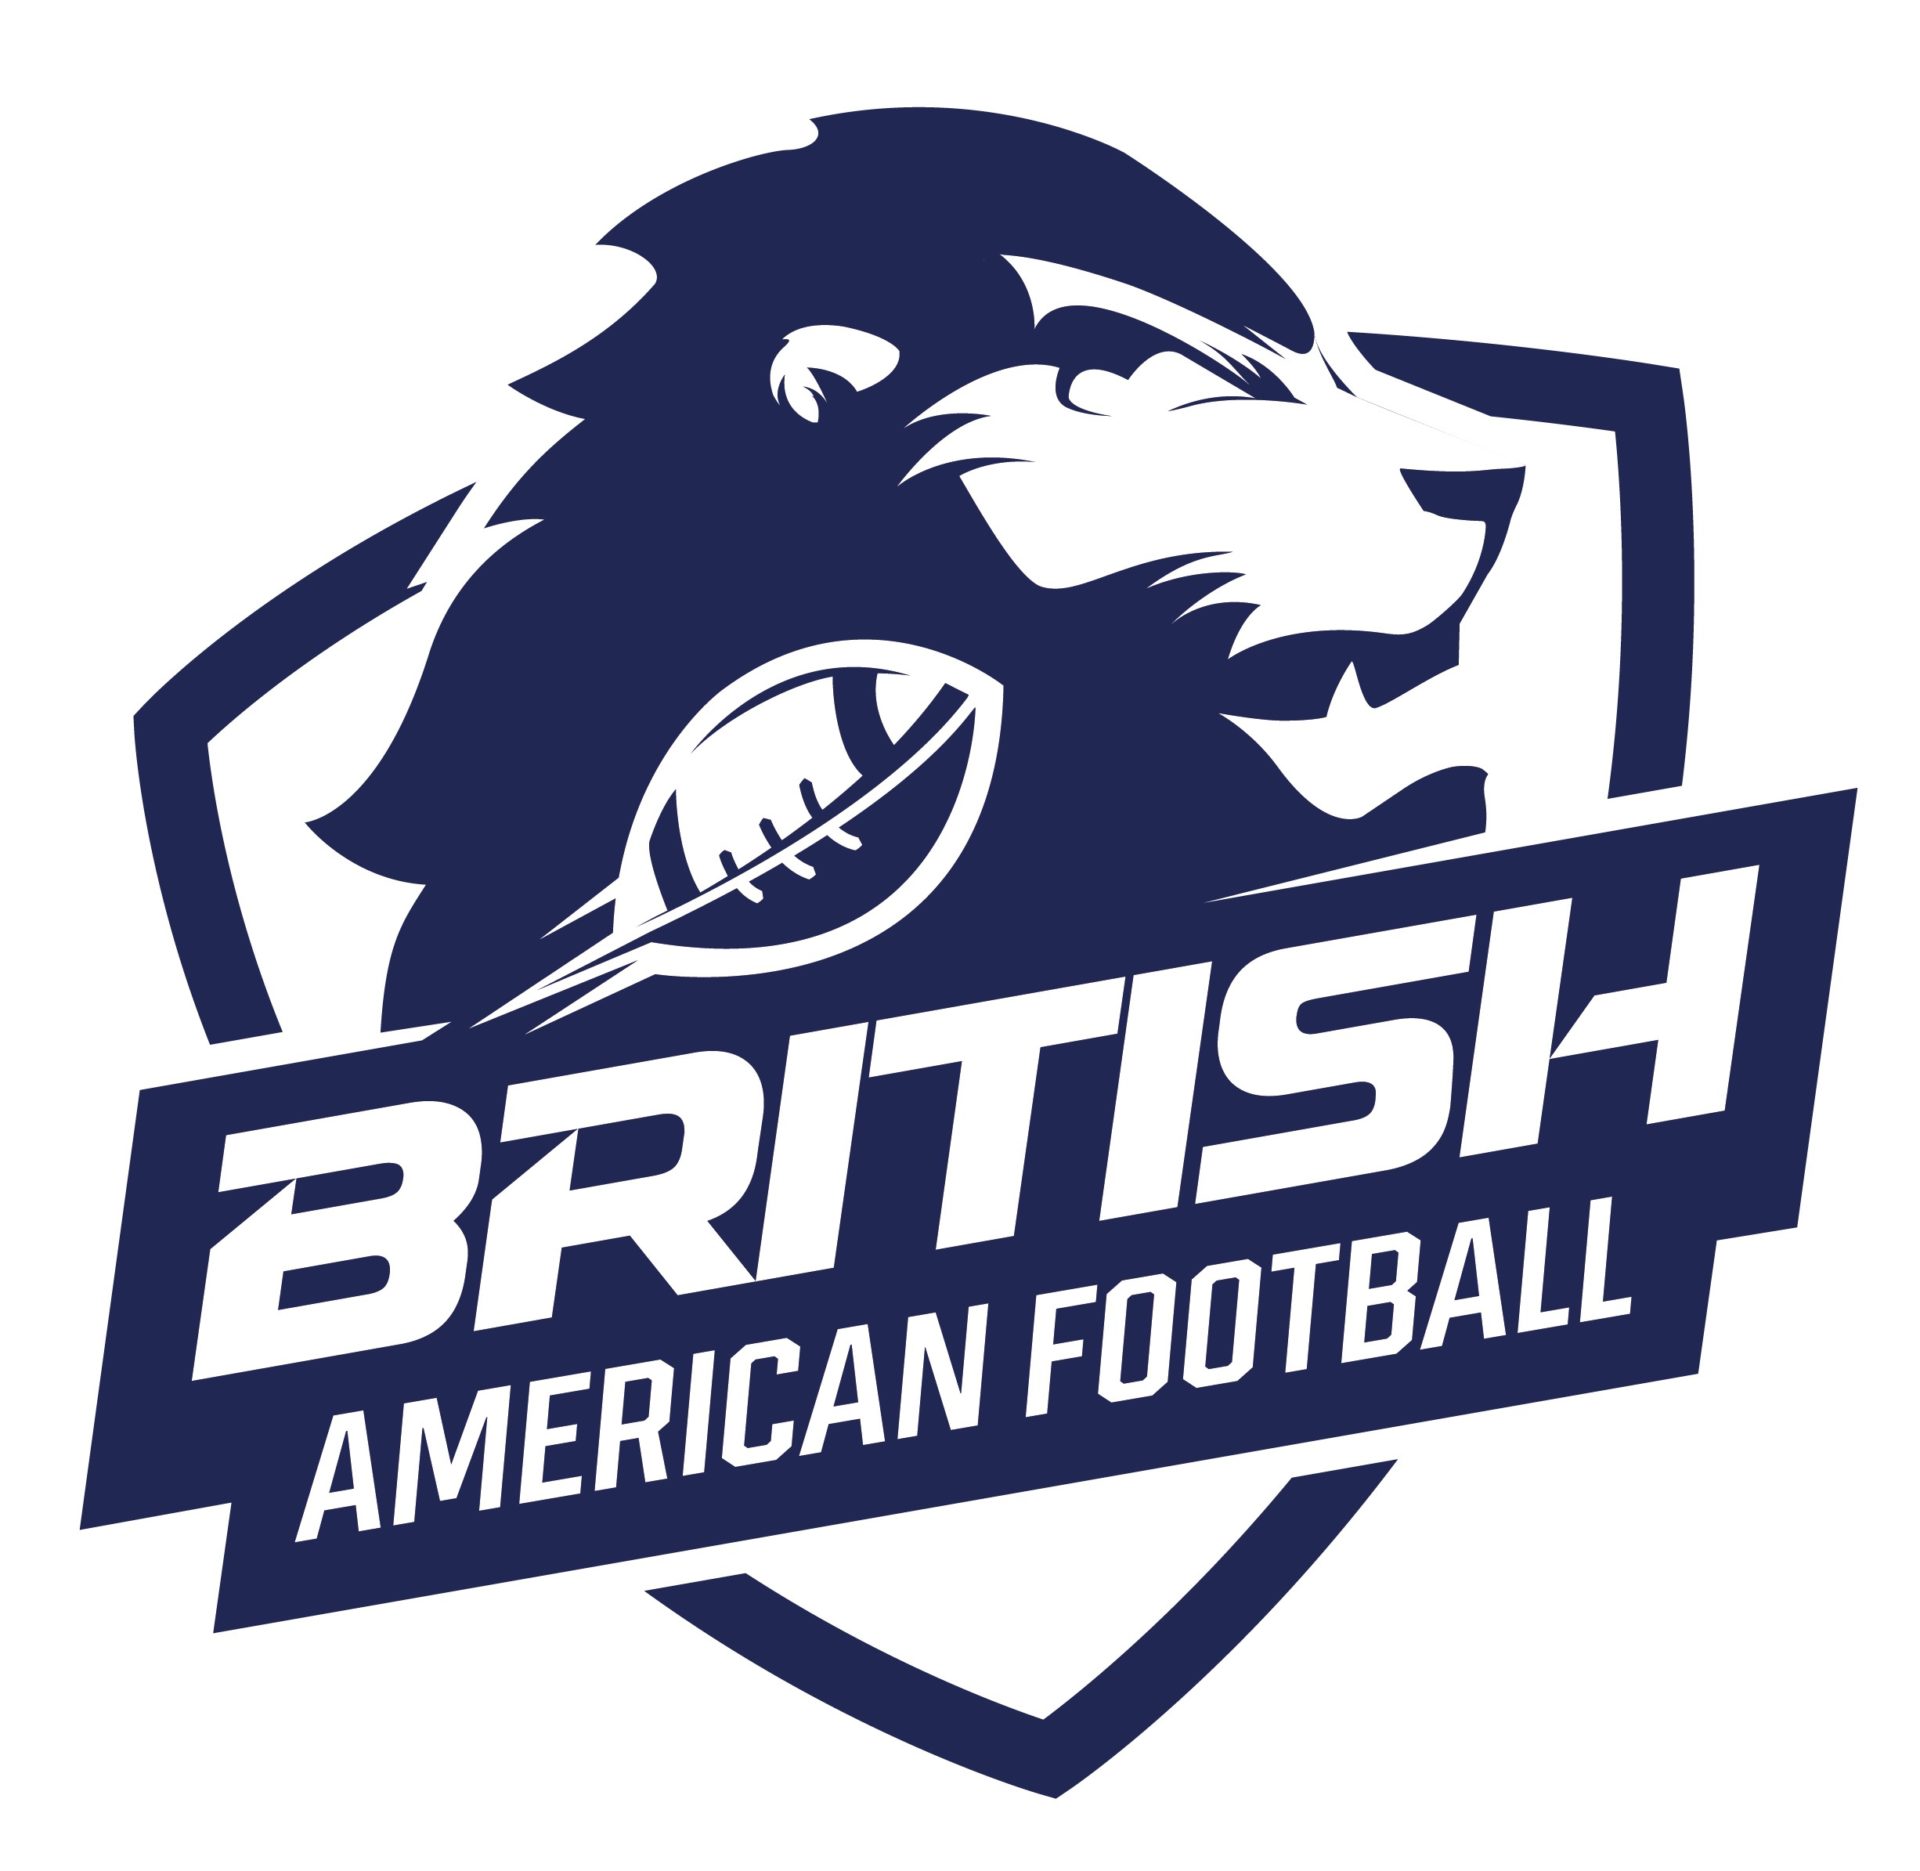 Study explores coping strategies of GB American Football players